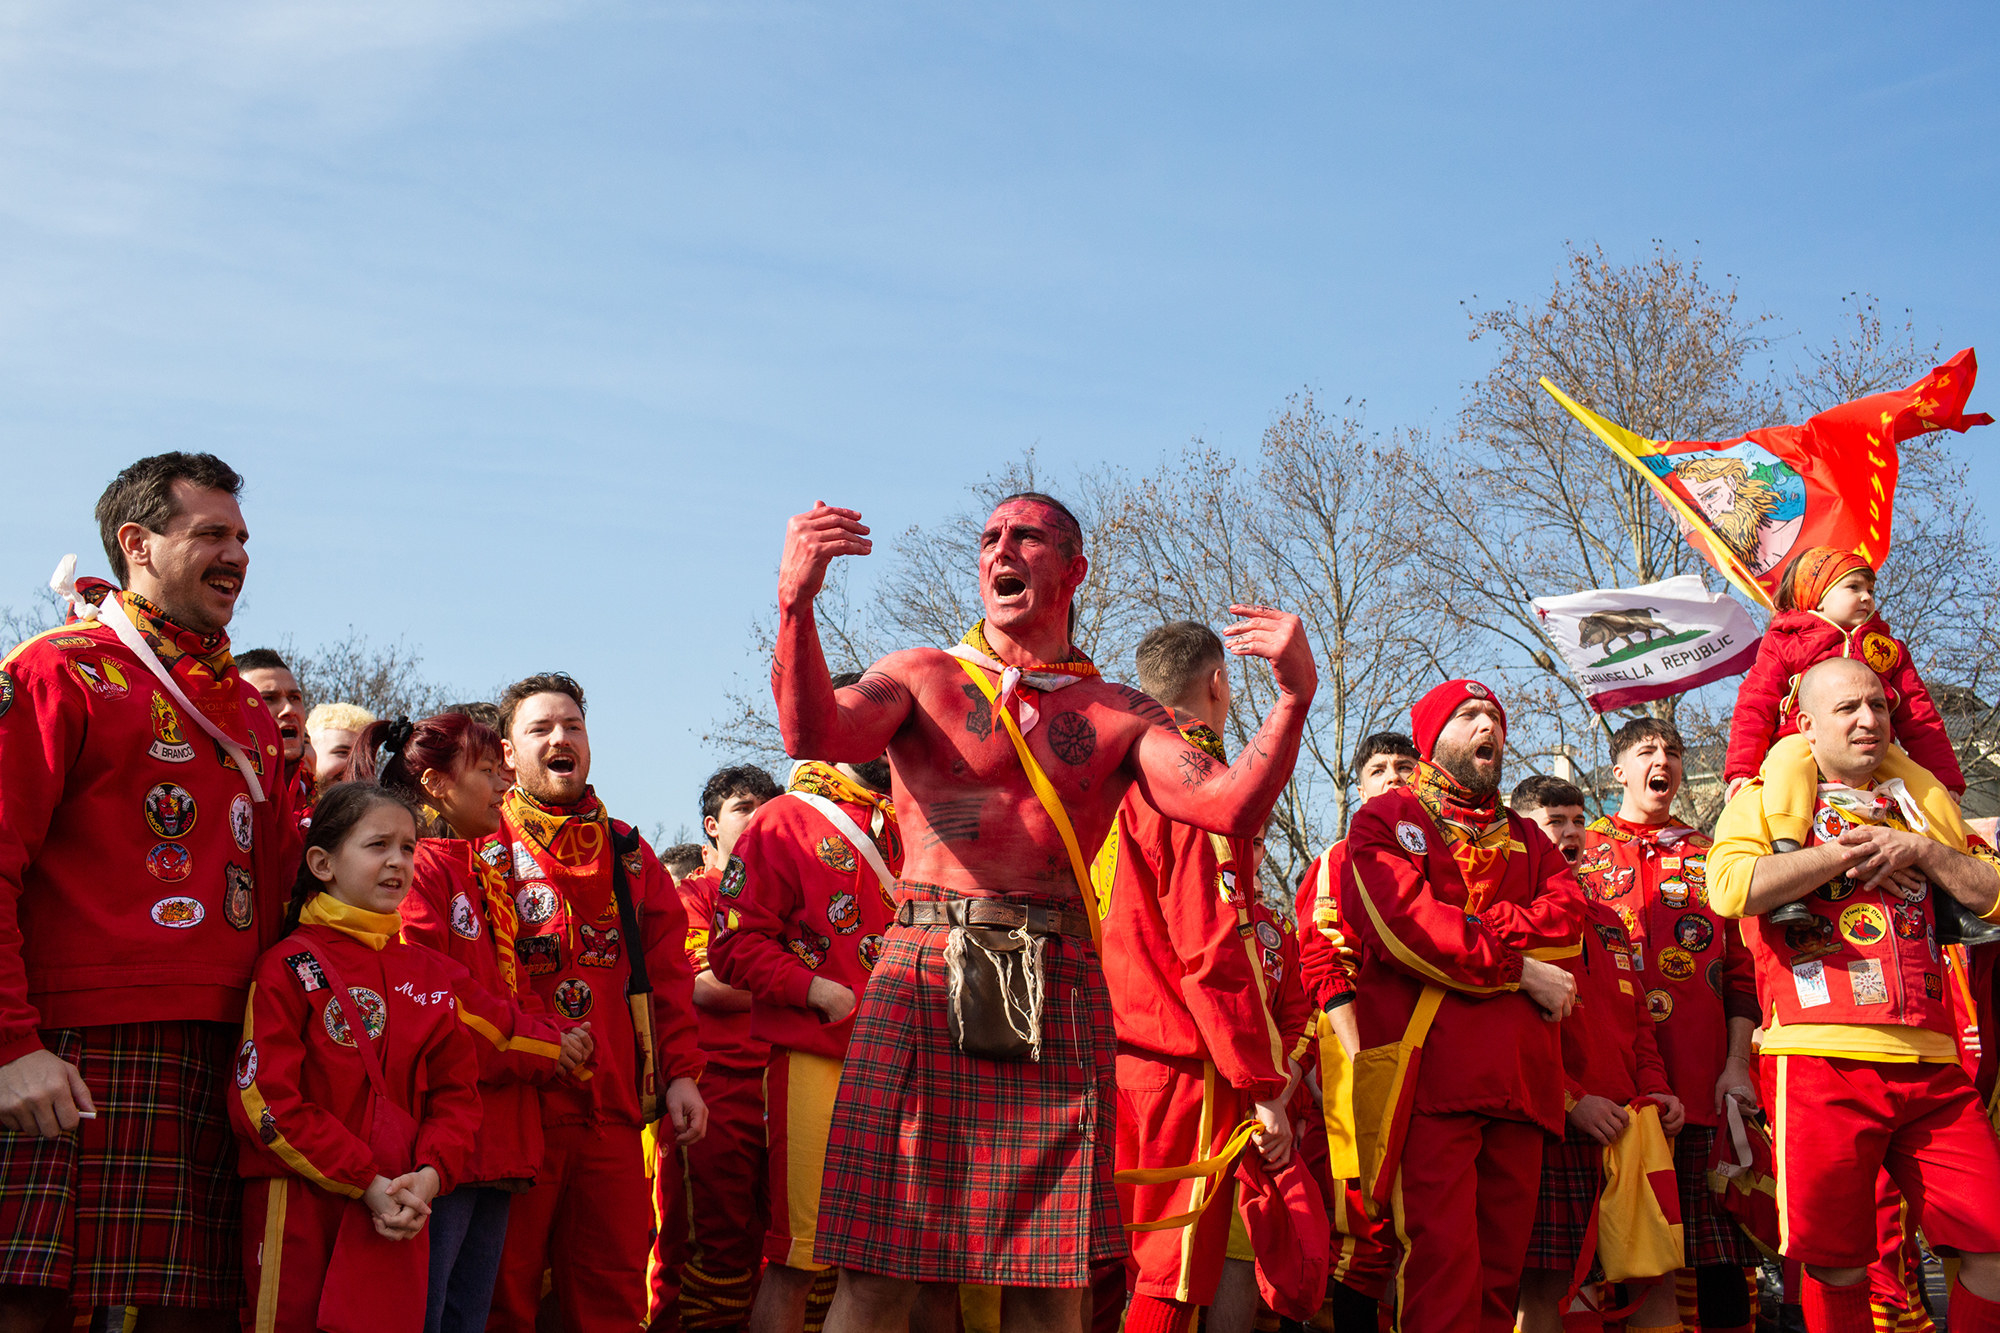 People wear red outfits and yellow bandanas outside, all yelling, surrounding a shirtless man wearing a kilt whose torso is painted red